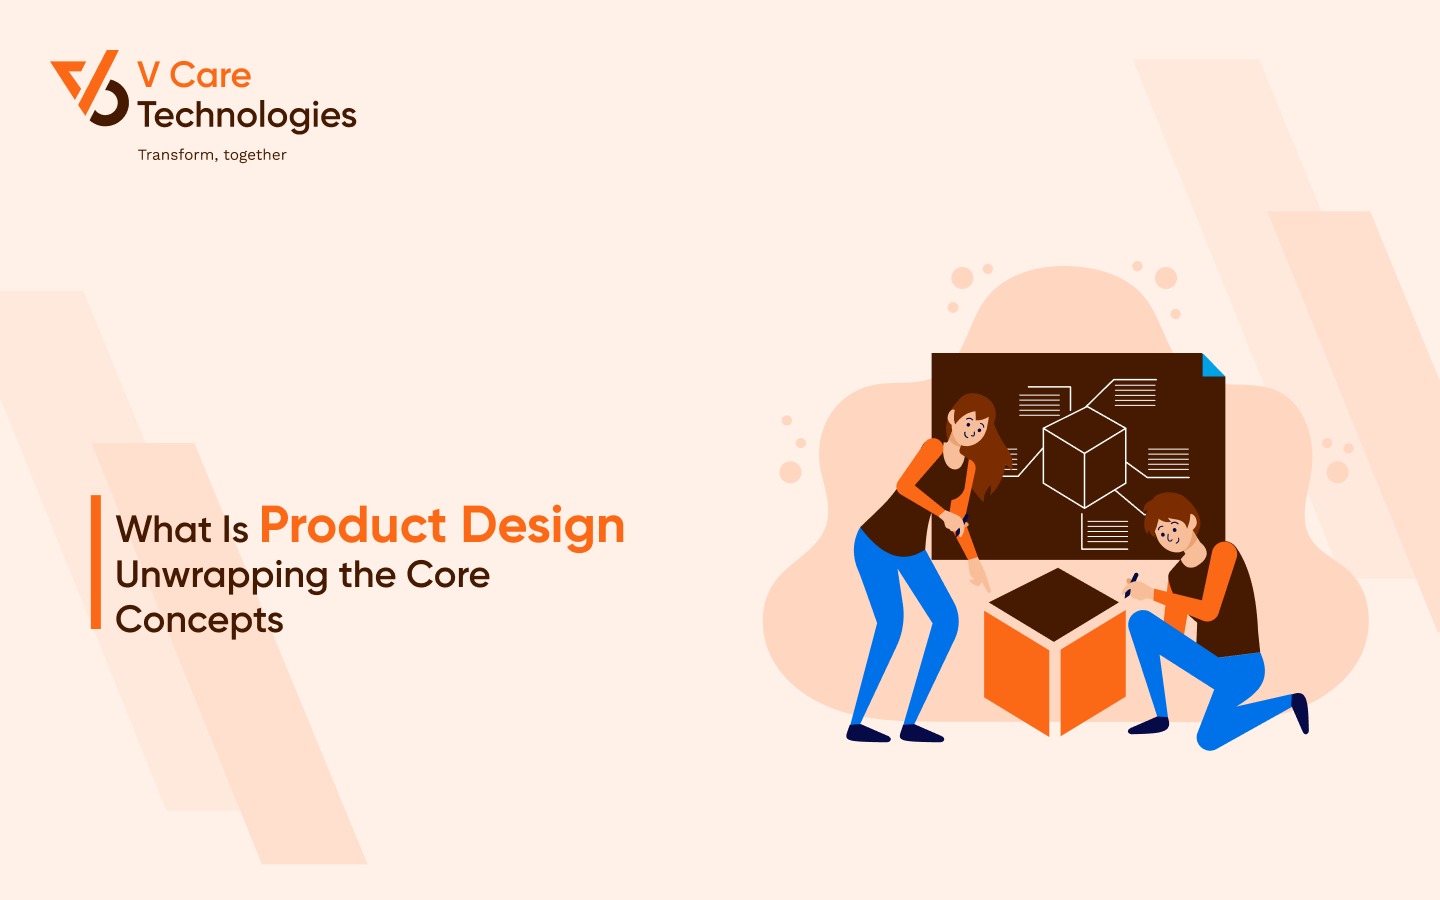 What Is Product Design? Unwrapping the Core Concepts